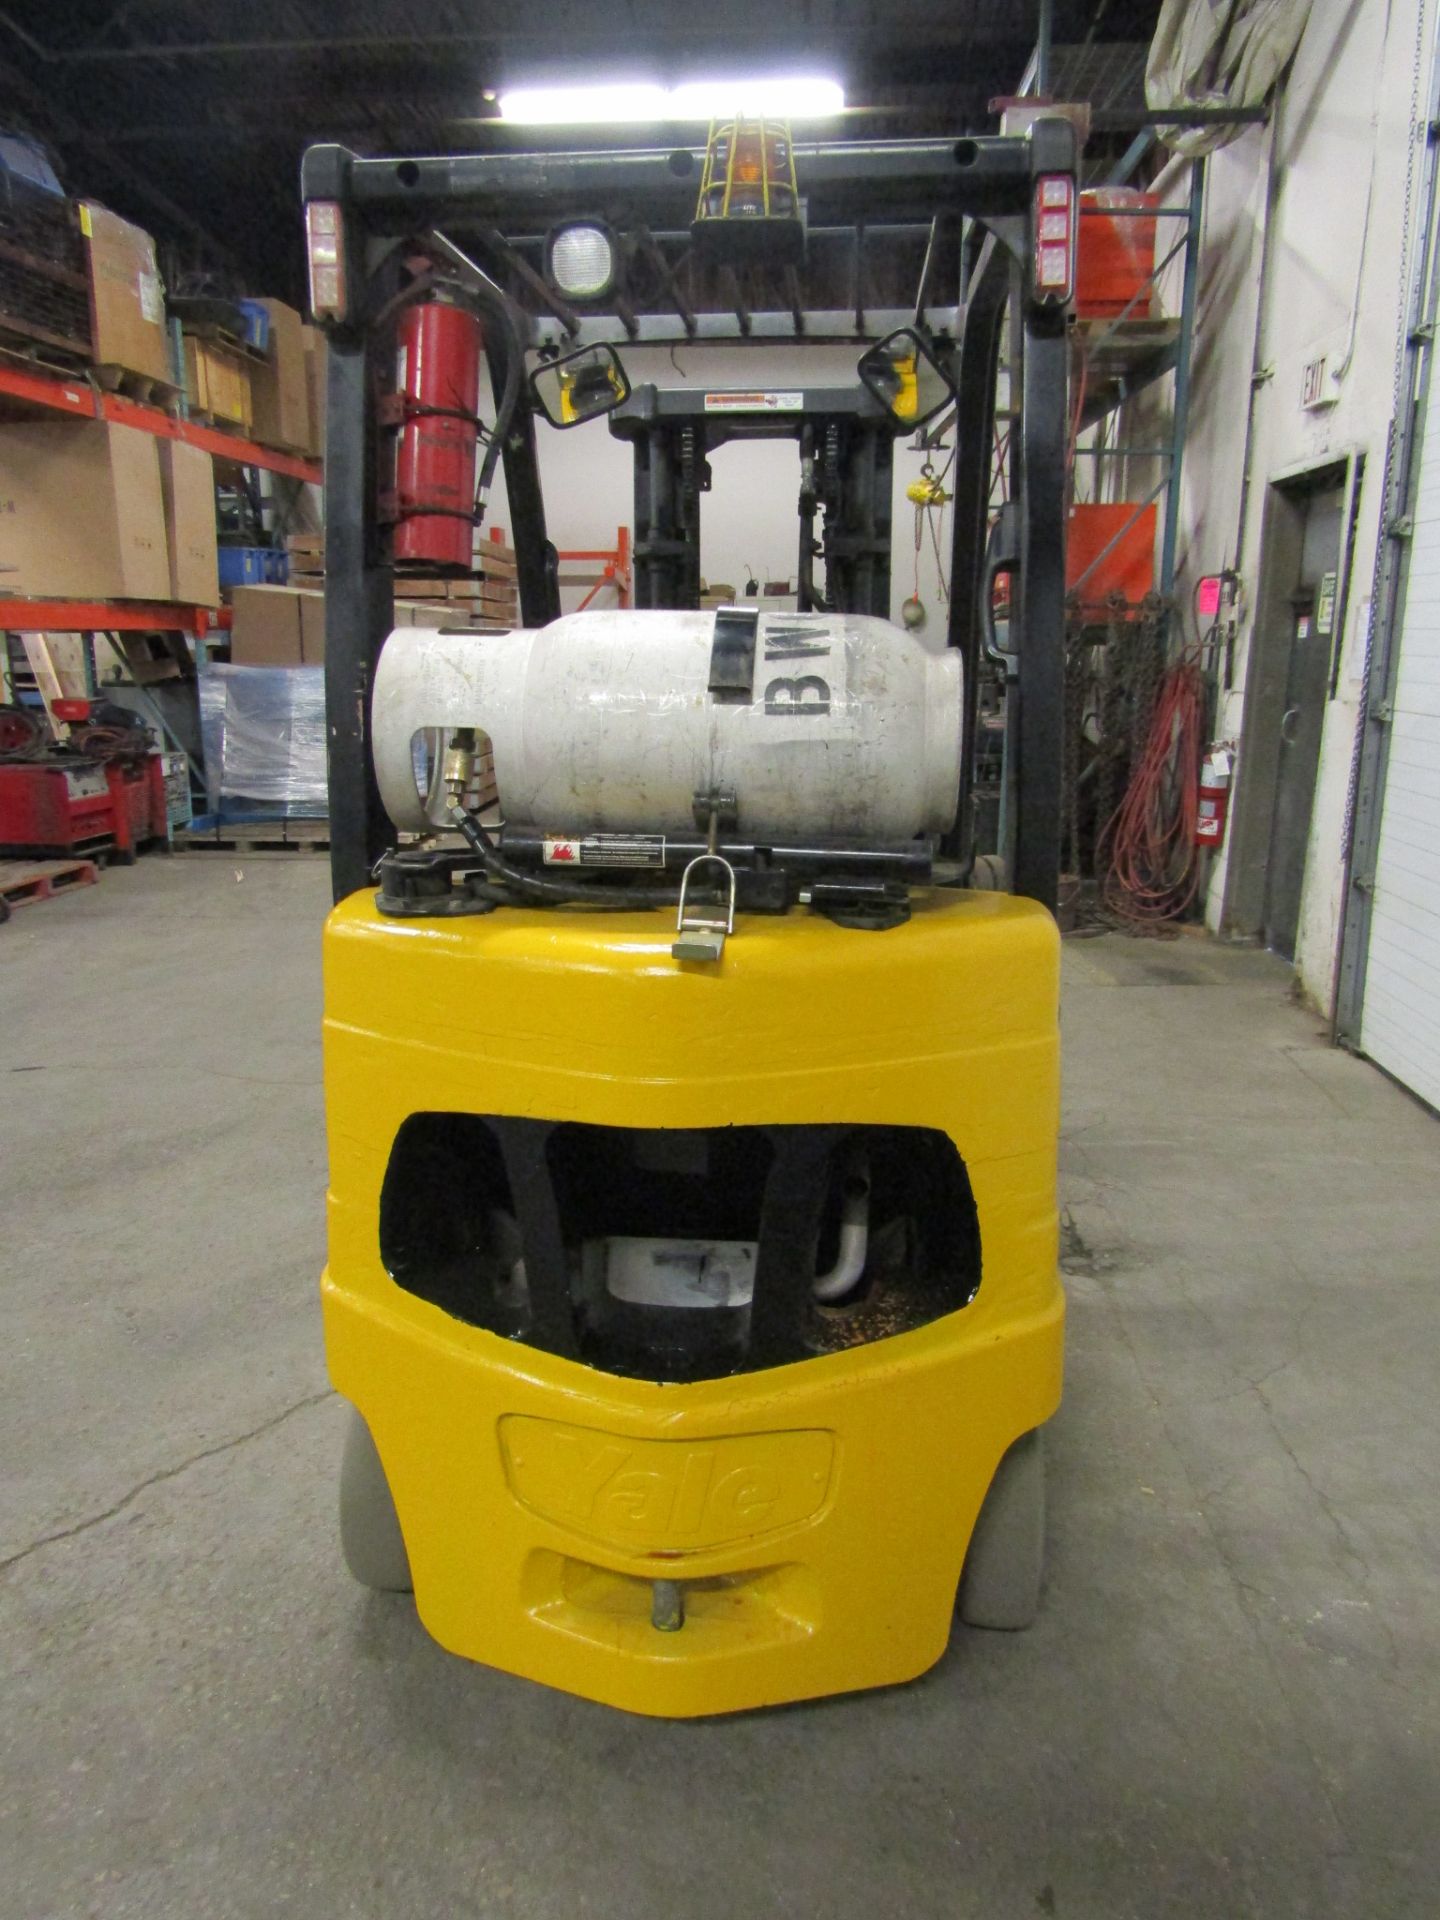 2008 Yale 5000lbs Capacity Forklift - LPG (propane) with 3-stage mast & sideshift (no propane tank - Image 2 of 3